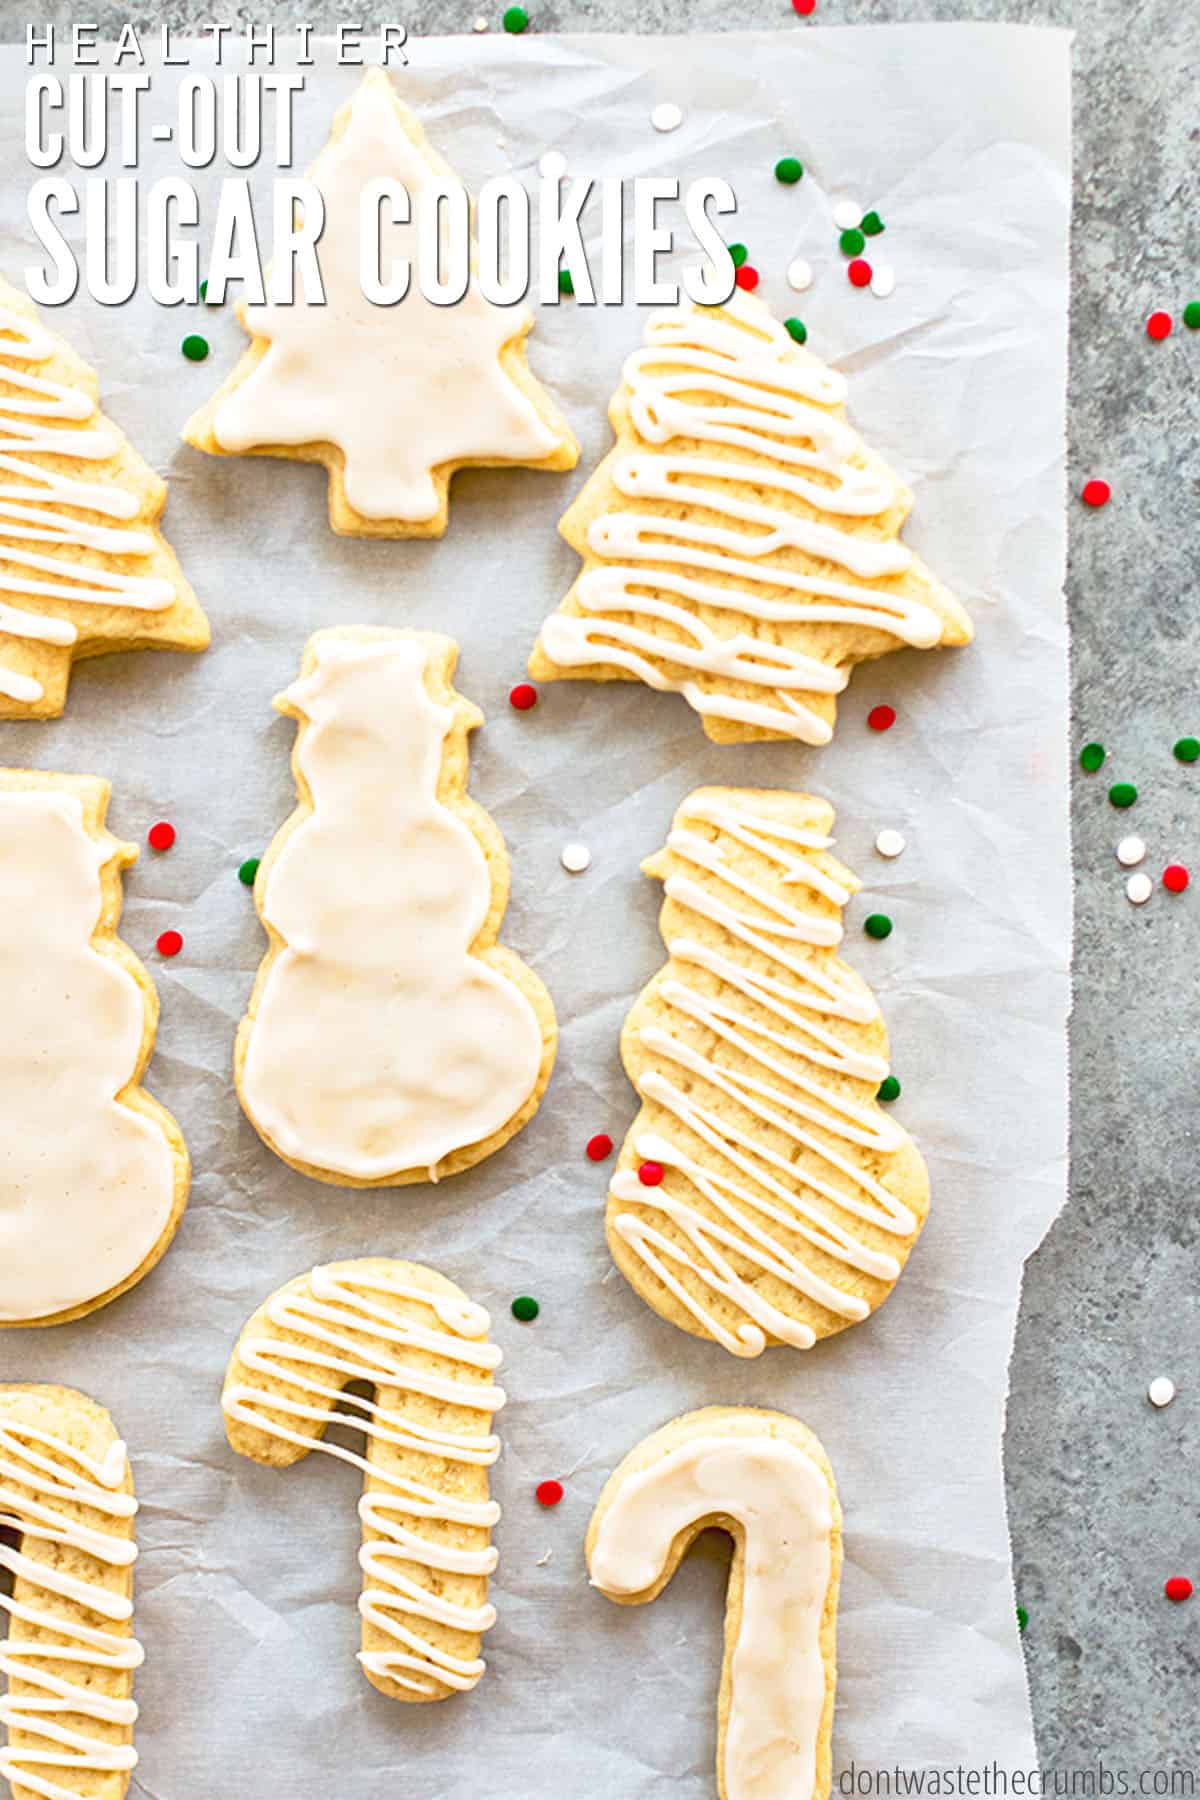 Nine freshly baked sugar Christmas cookies with white icing are spread out on a piece of parchment paper. There are red, green, and white round sprinkles all around the cookies. The text overlay reads, "Healthier Sugar Cookie Recipe."